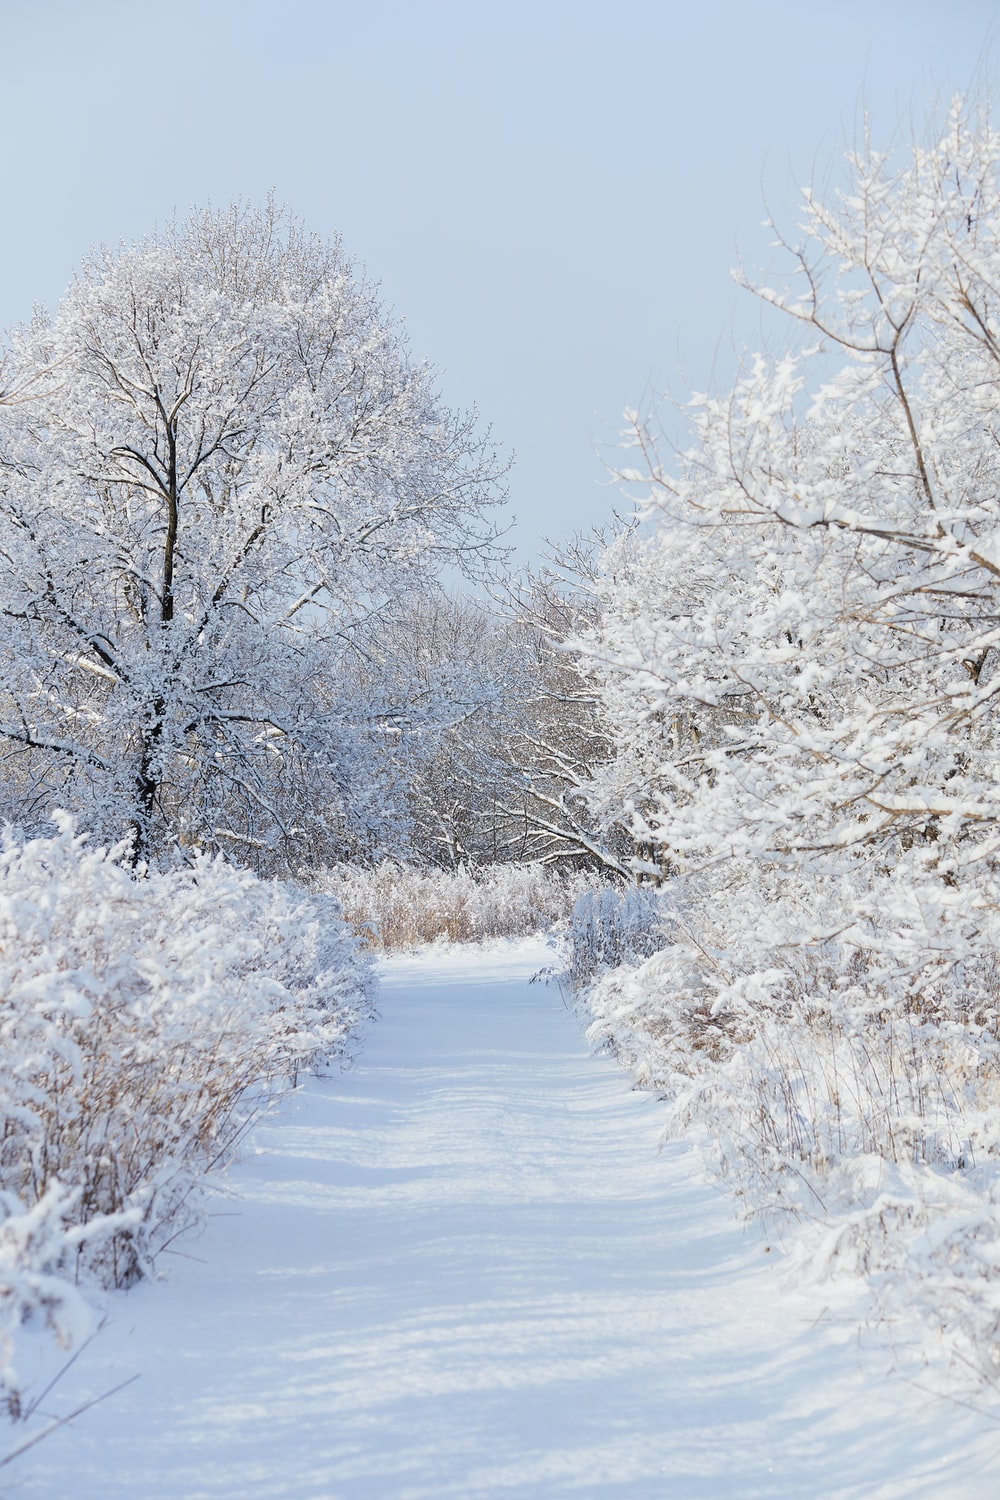 Winter Wallpaper Picture. Download Free Image